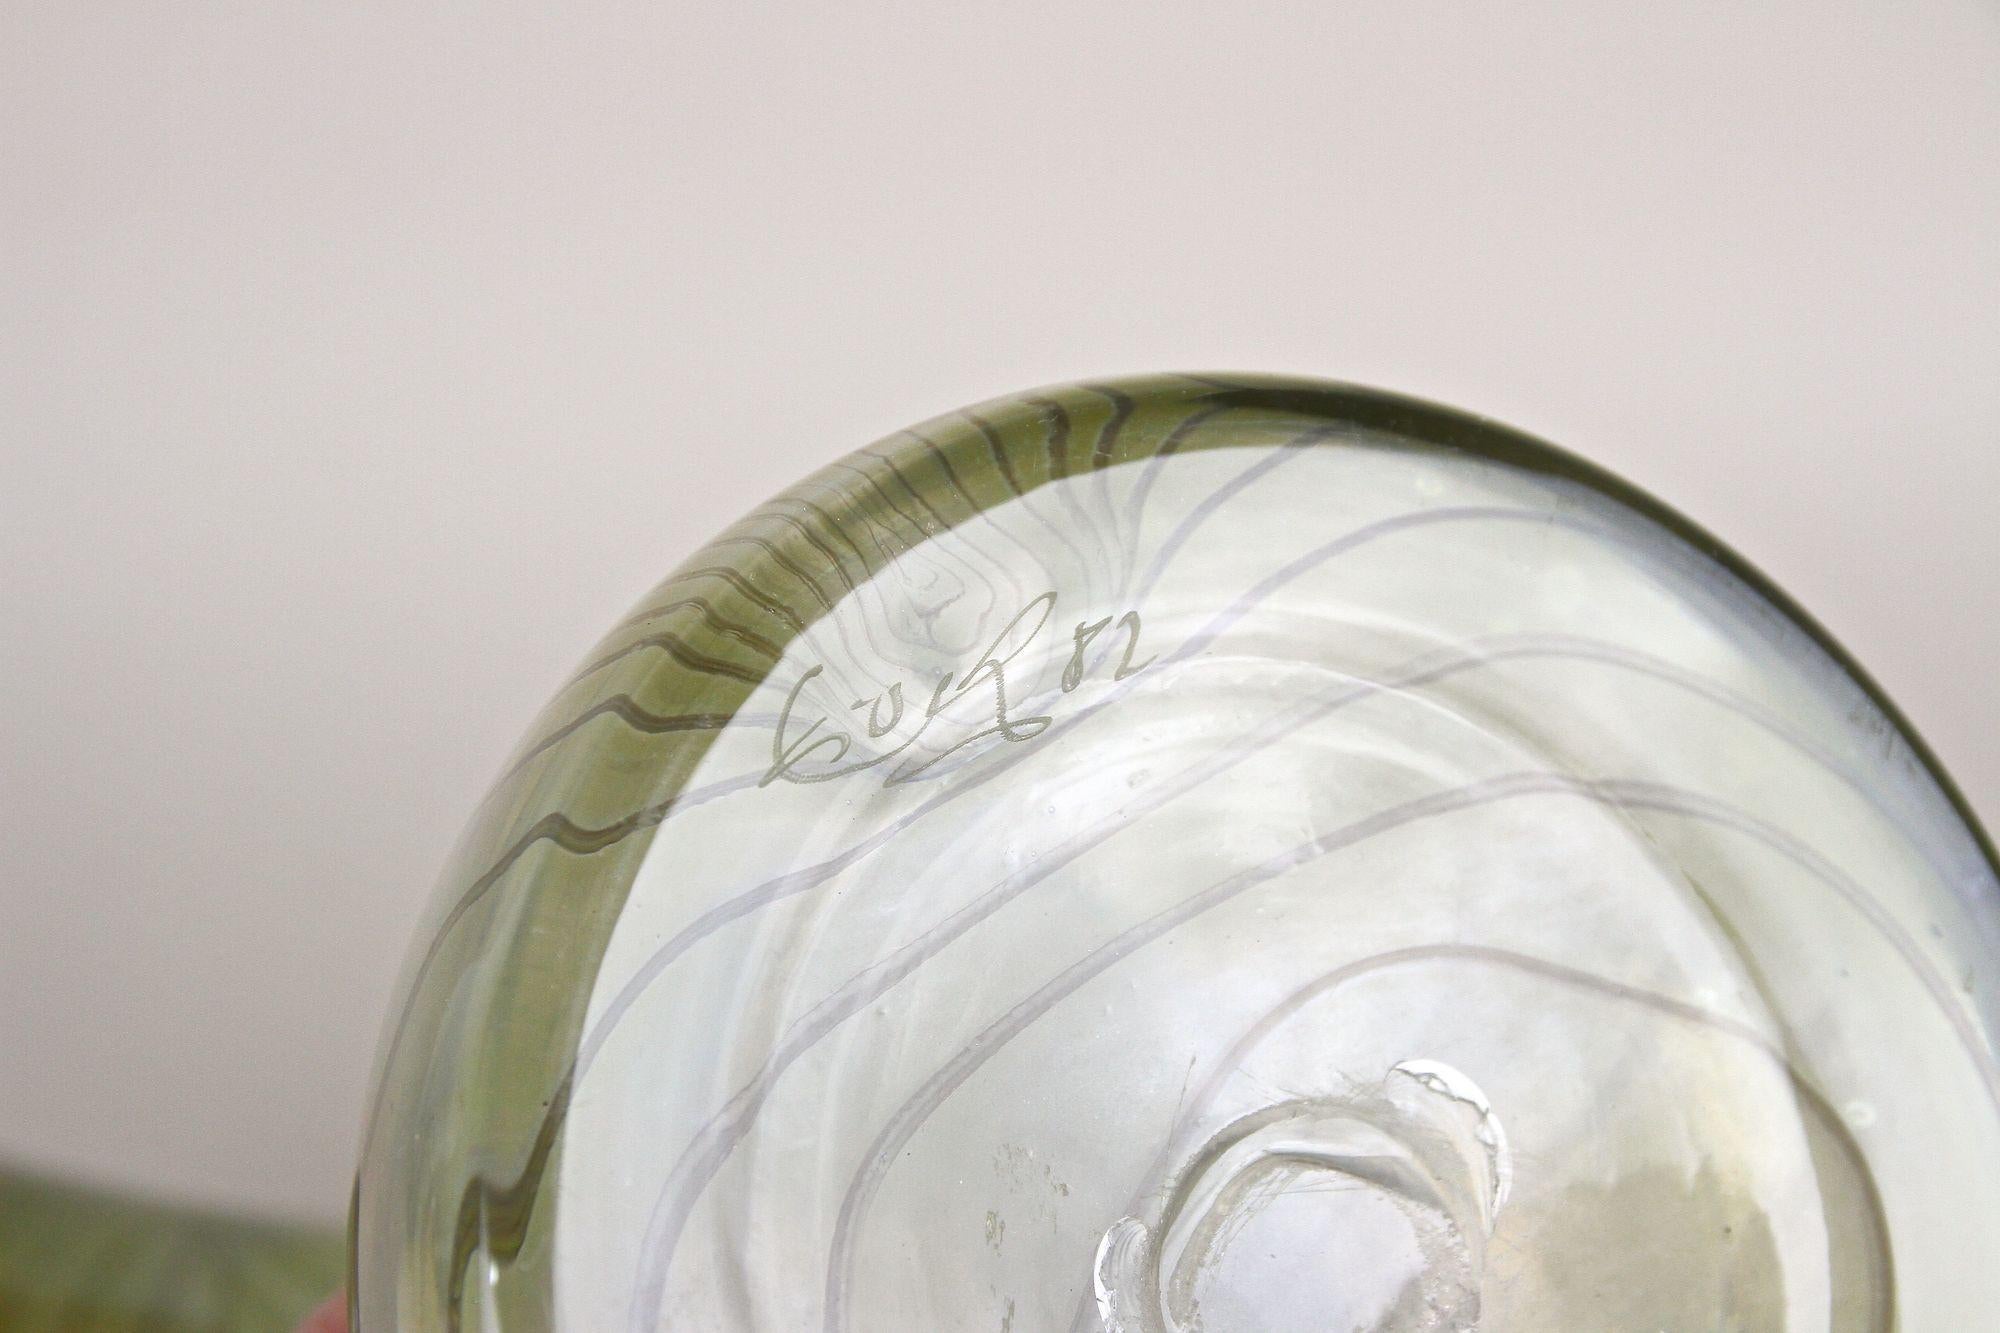 20th Century Iridescent Glass Vase by E. Eisch - Signed, Germany 1982 For Sale 14